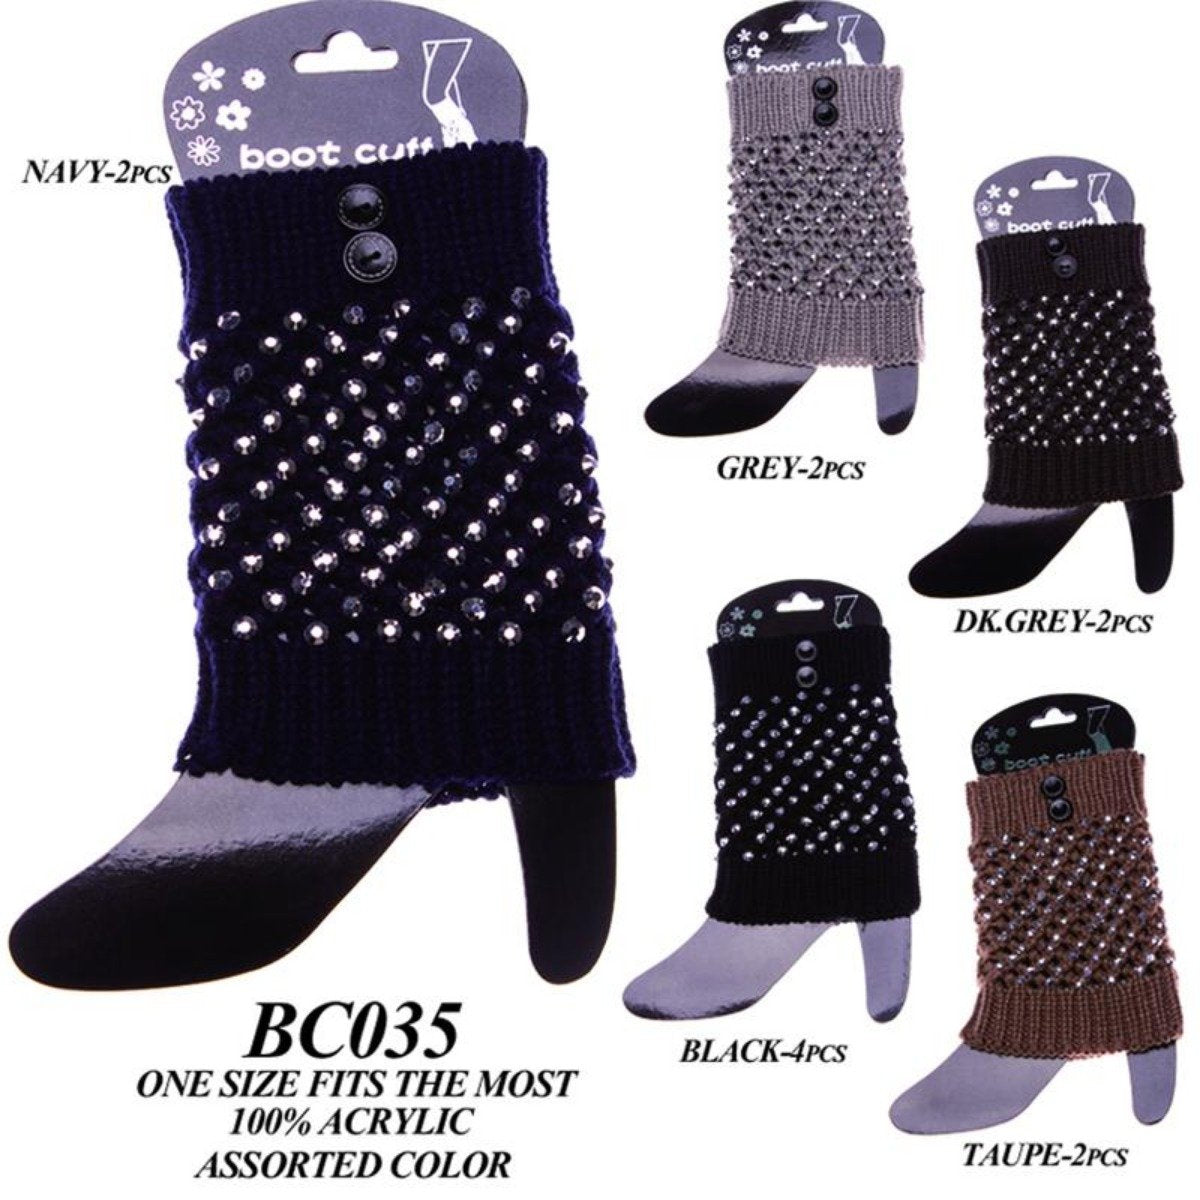 Rhinestone Studded Short Knitted Boot Cuffs W/ Buttons - 12Pc Set